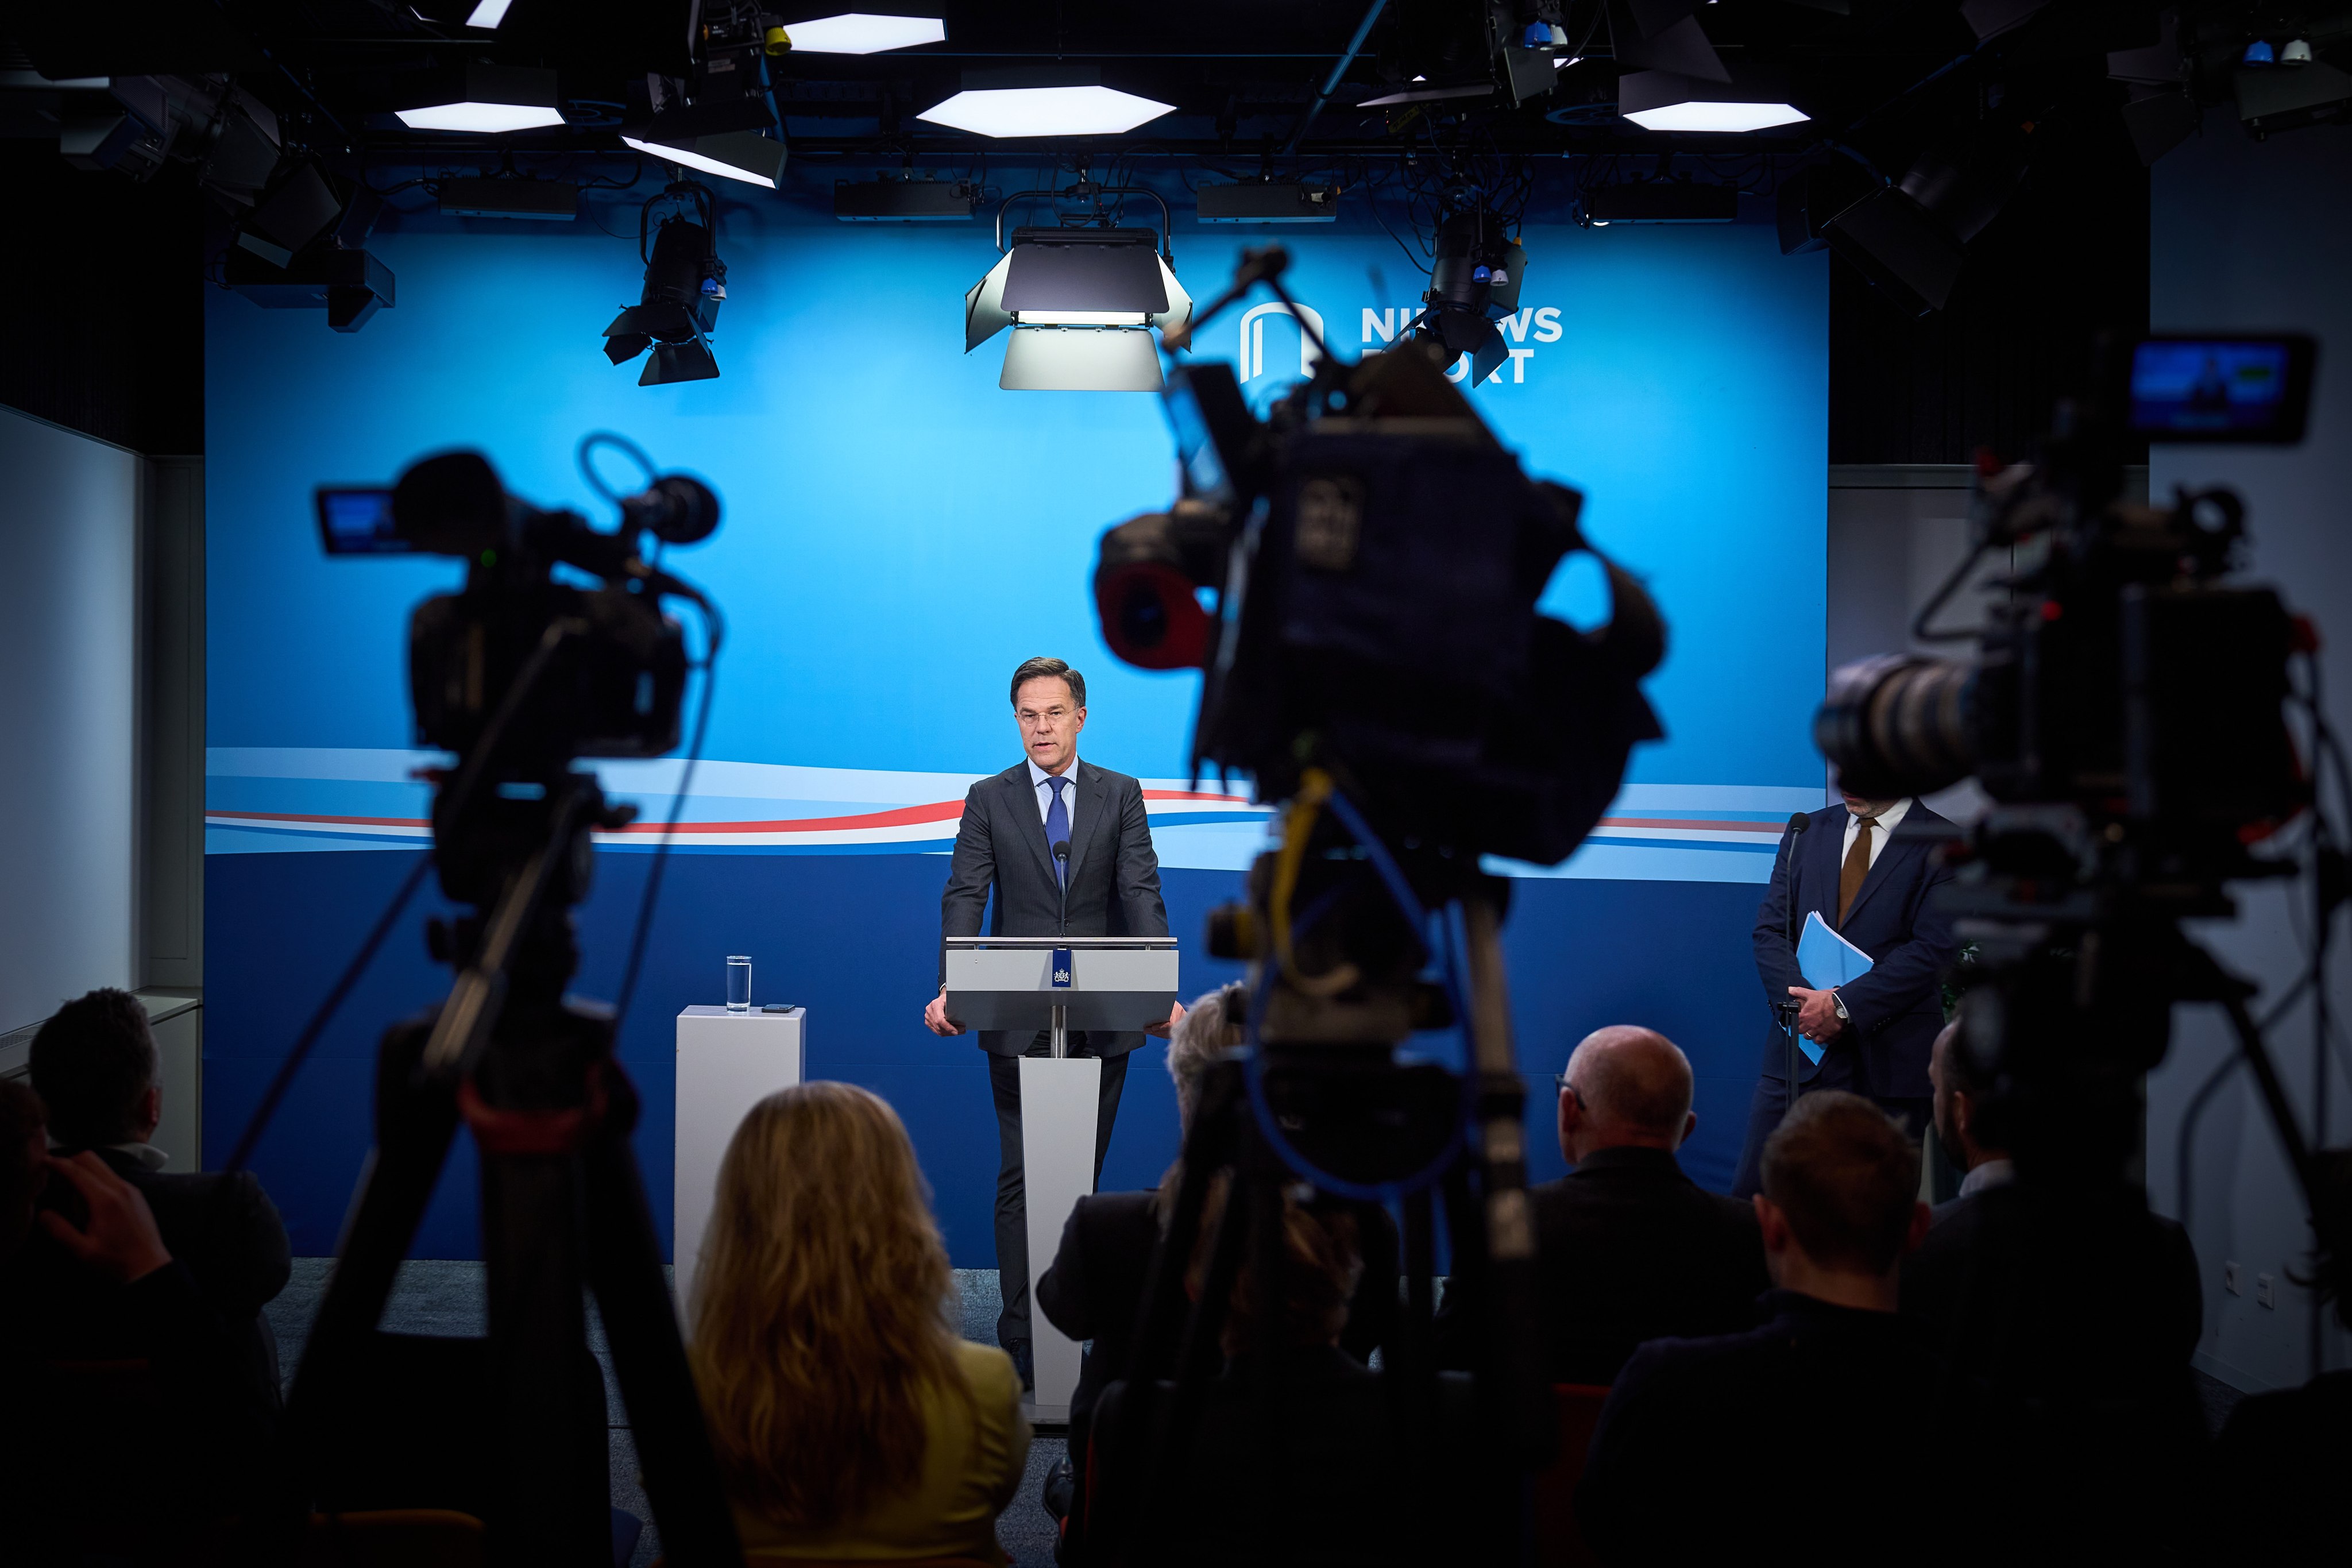 Dutch Prime Minister Mark Rutte speaks after the weekly Council of Ministers in The Hague on May 12. Photo: EPA-EFE